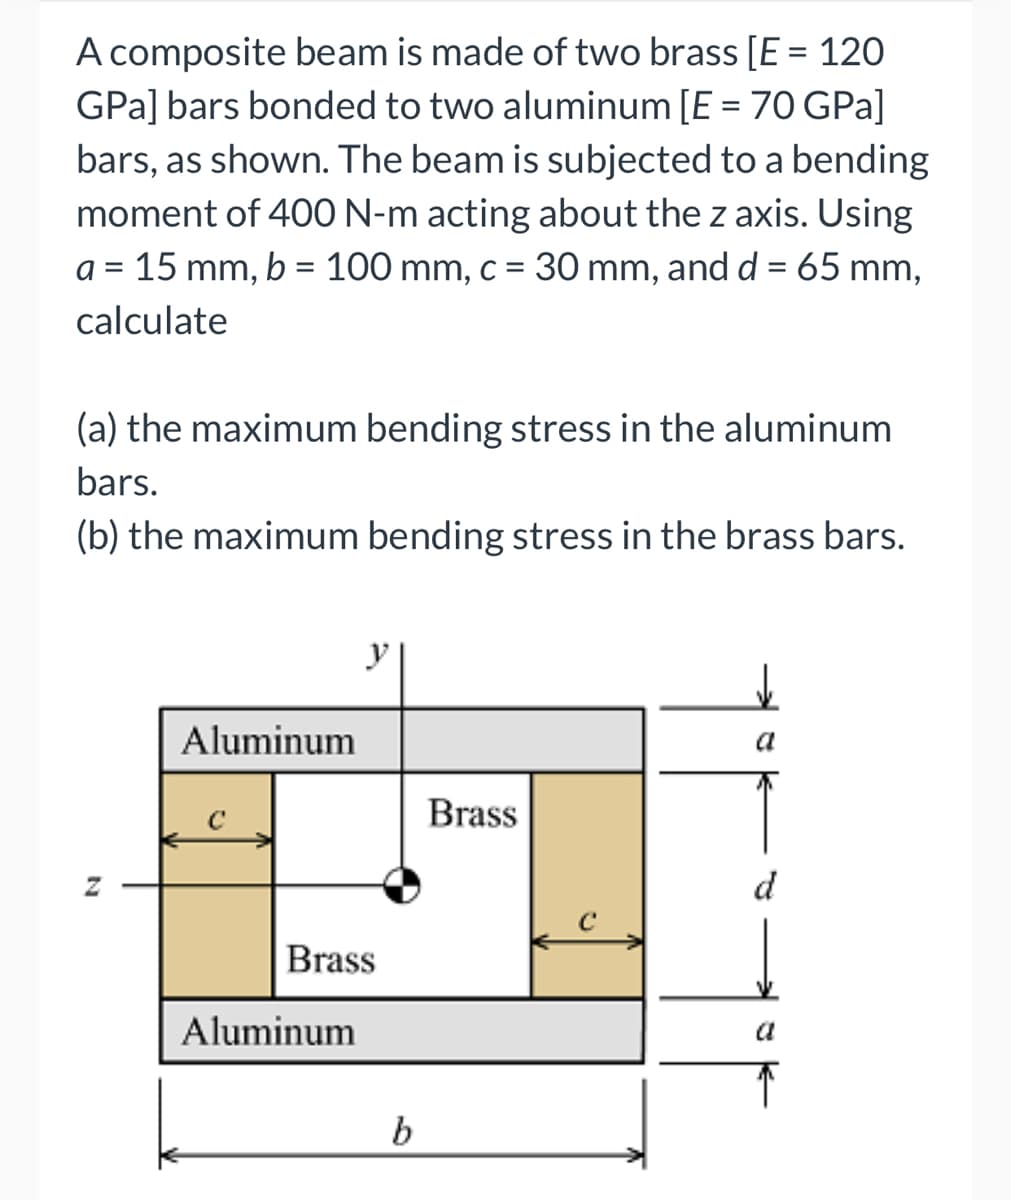 A composite beam is made of two brass [E = 120
GPa] bars bonded to two aluminum [E = 70 GPa]
bars, as shown. The beam is subjected to a bending
moment of 400 N-m acting about the z axis. Using
a = 15 mm, b = 100 mm, c = 30 mm, and d = 65 mm,
calculate
(a) the maximum bending stress in the aluminum
bars.
(b) the maximum bending stress in the brass bars.
Aluminum
y
Brass
Aluminum
b
Brass
C
a
d